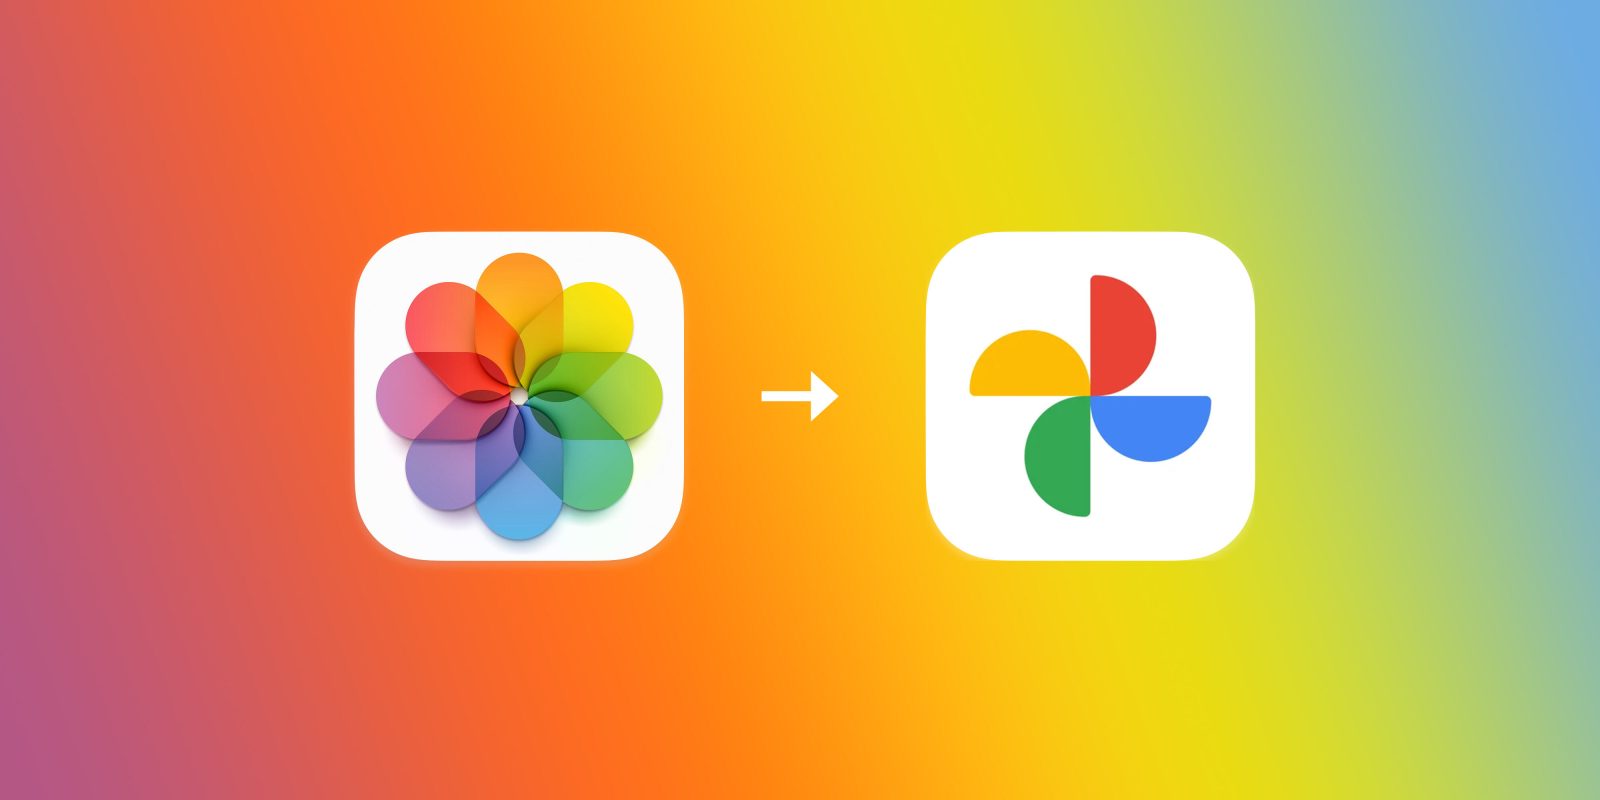 Icloud Photos To Google Photos How To Transfer Directly 9to5mac